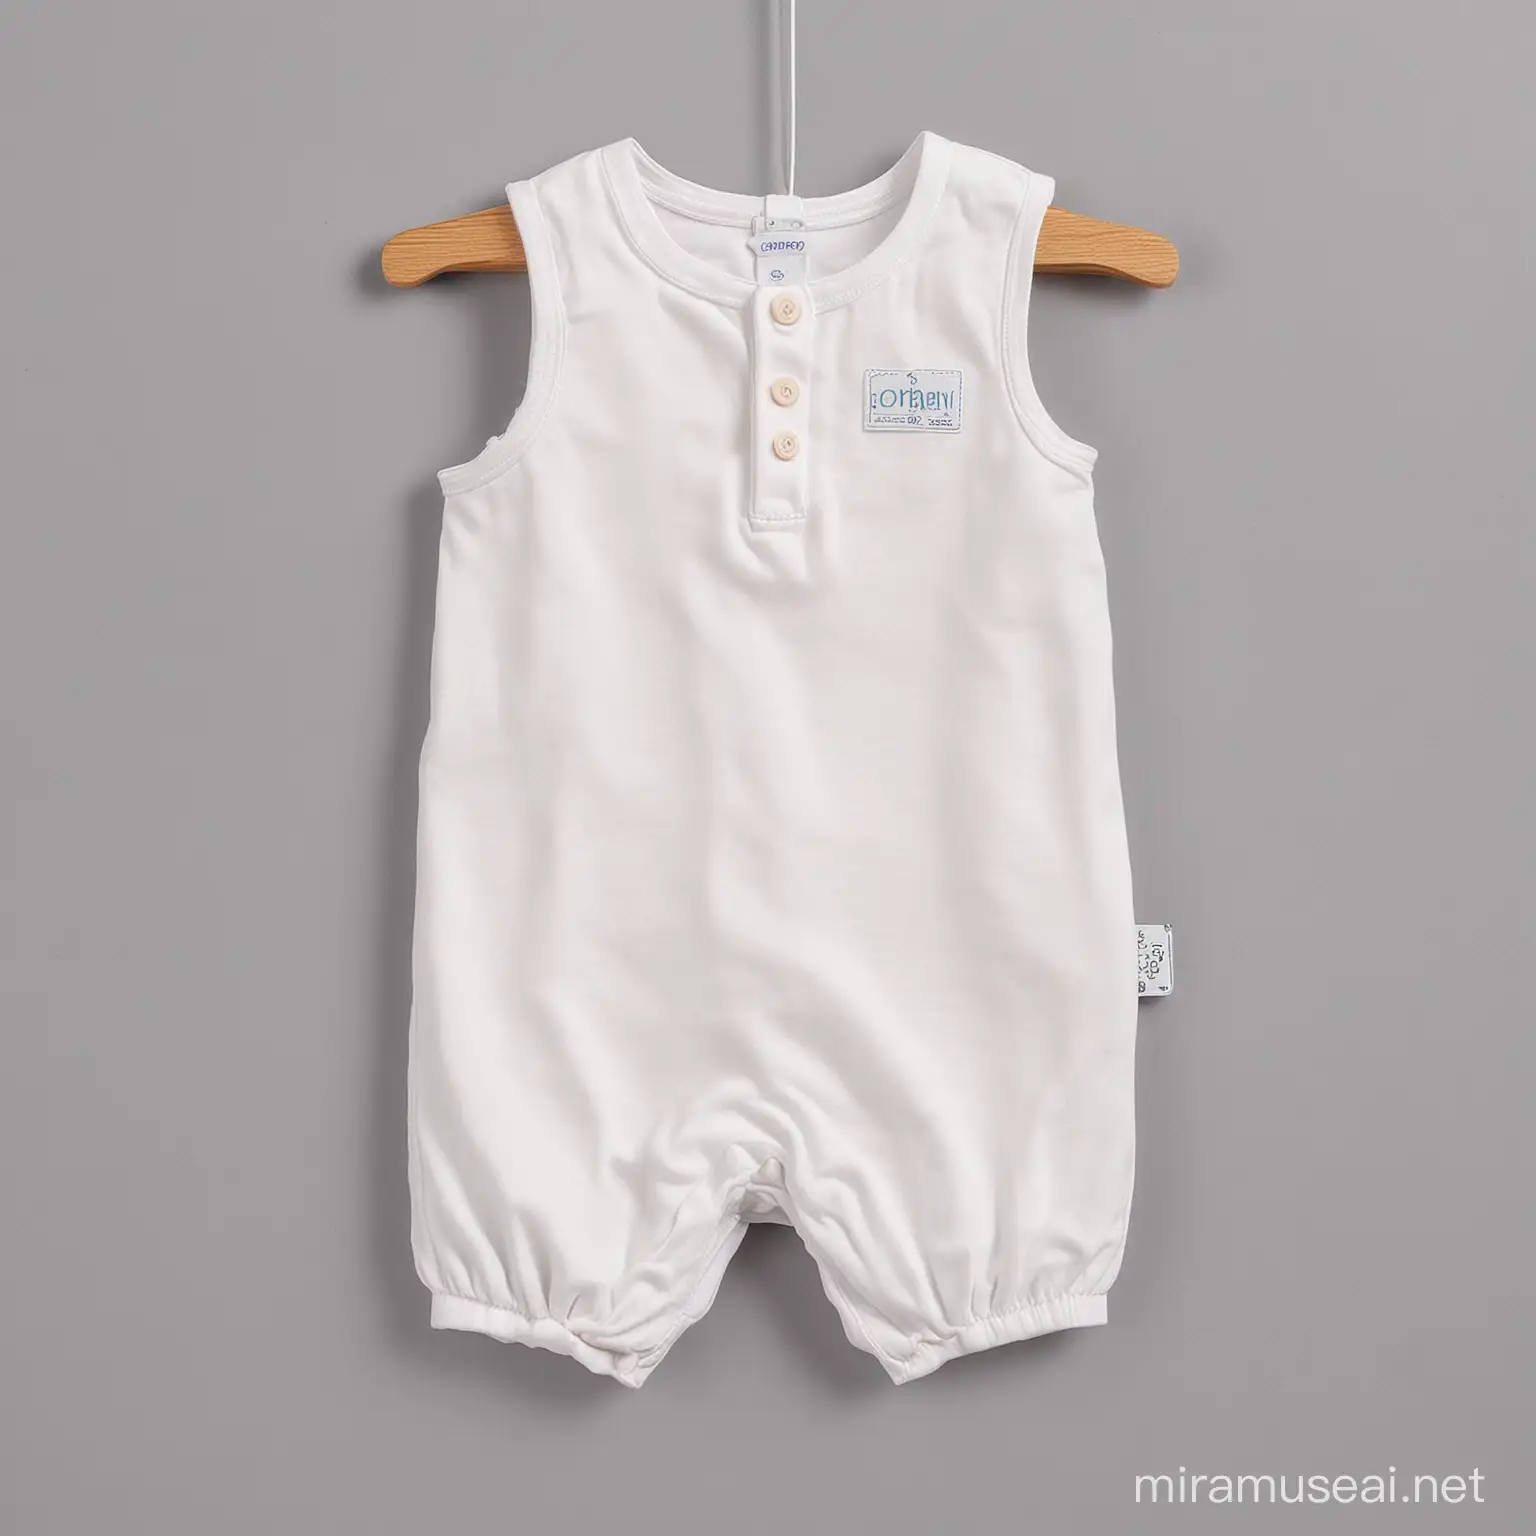 baby romper with a small tag on the side of the garment, tag should be zoomed in, tag used for branding